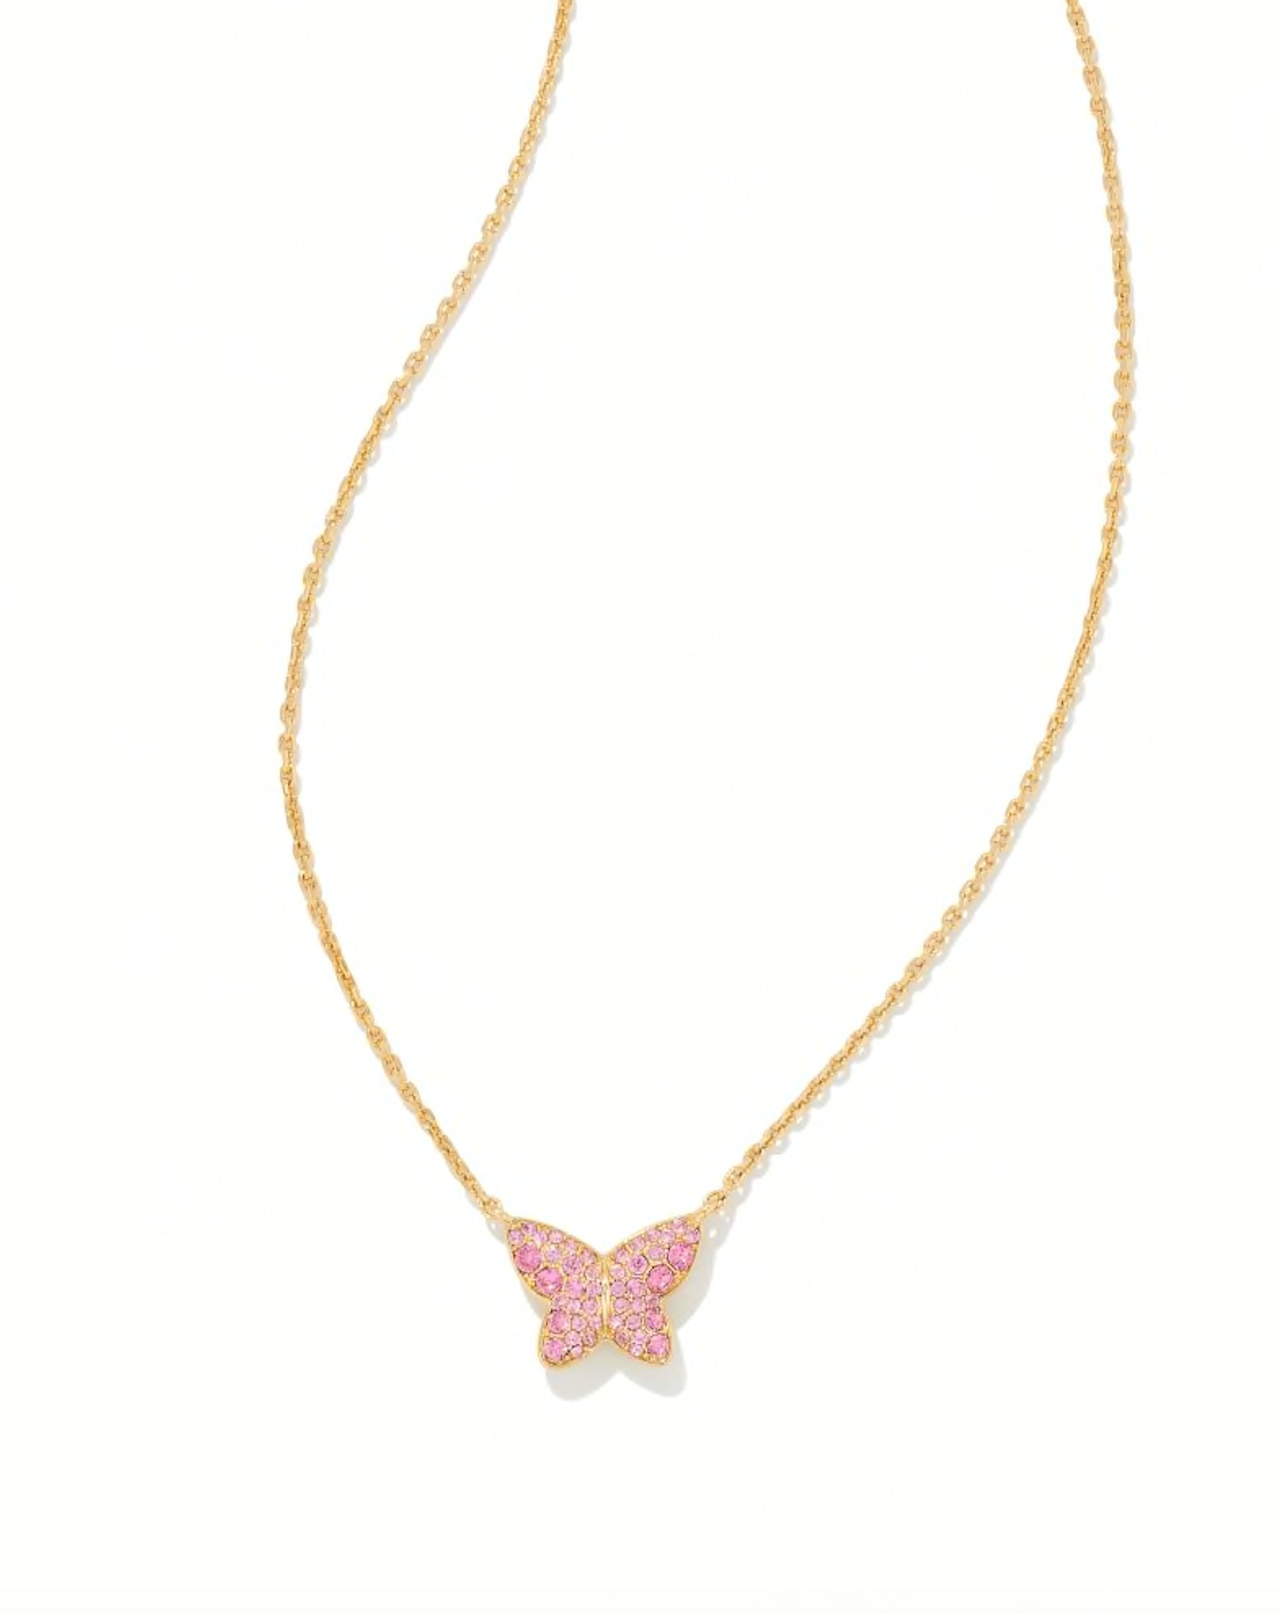 Lillia Butterfly Gold Pendant Necklace in Pink Crystal